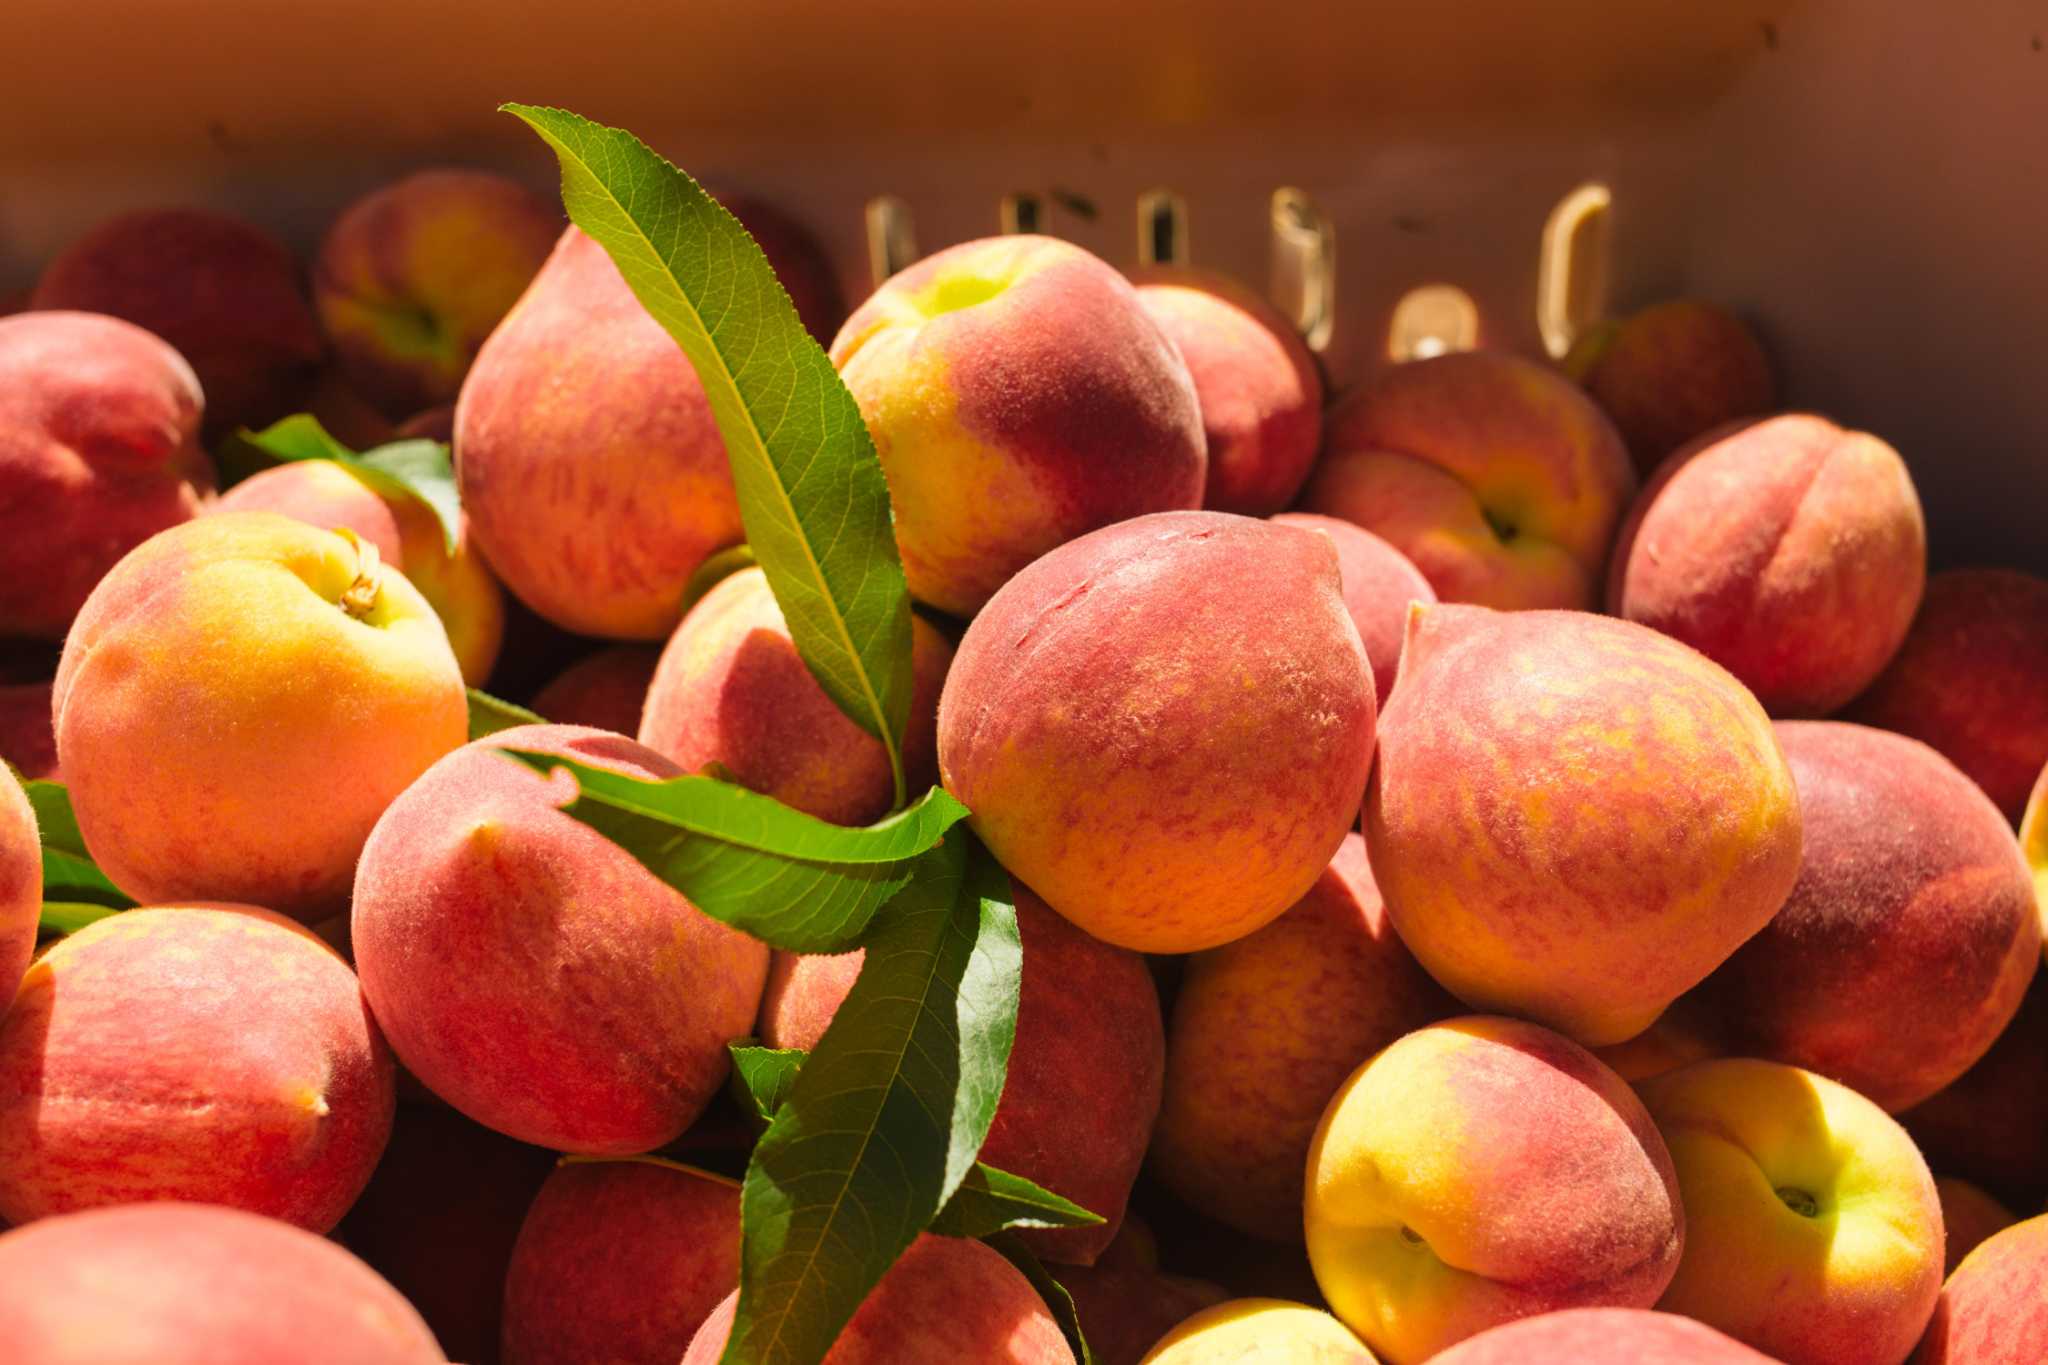 The Peach Truck tour will bring homegrown peaches to the